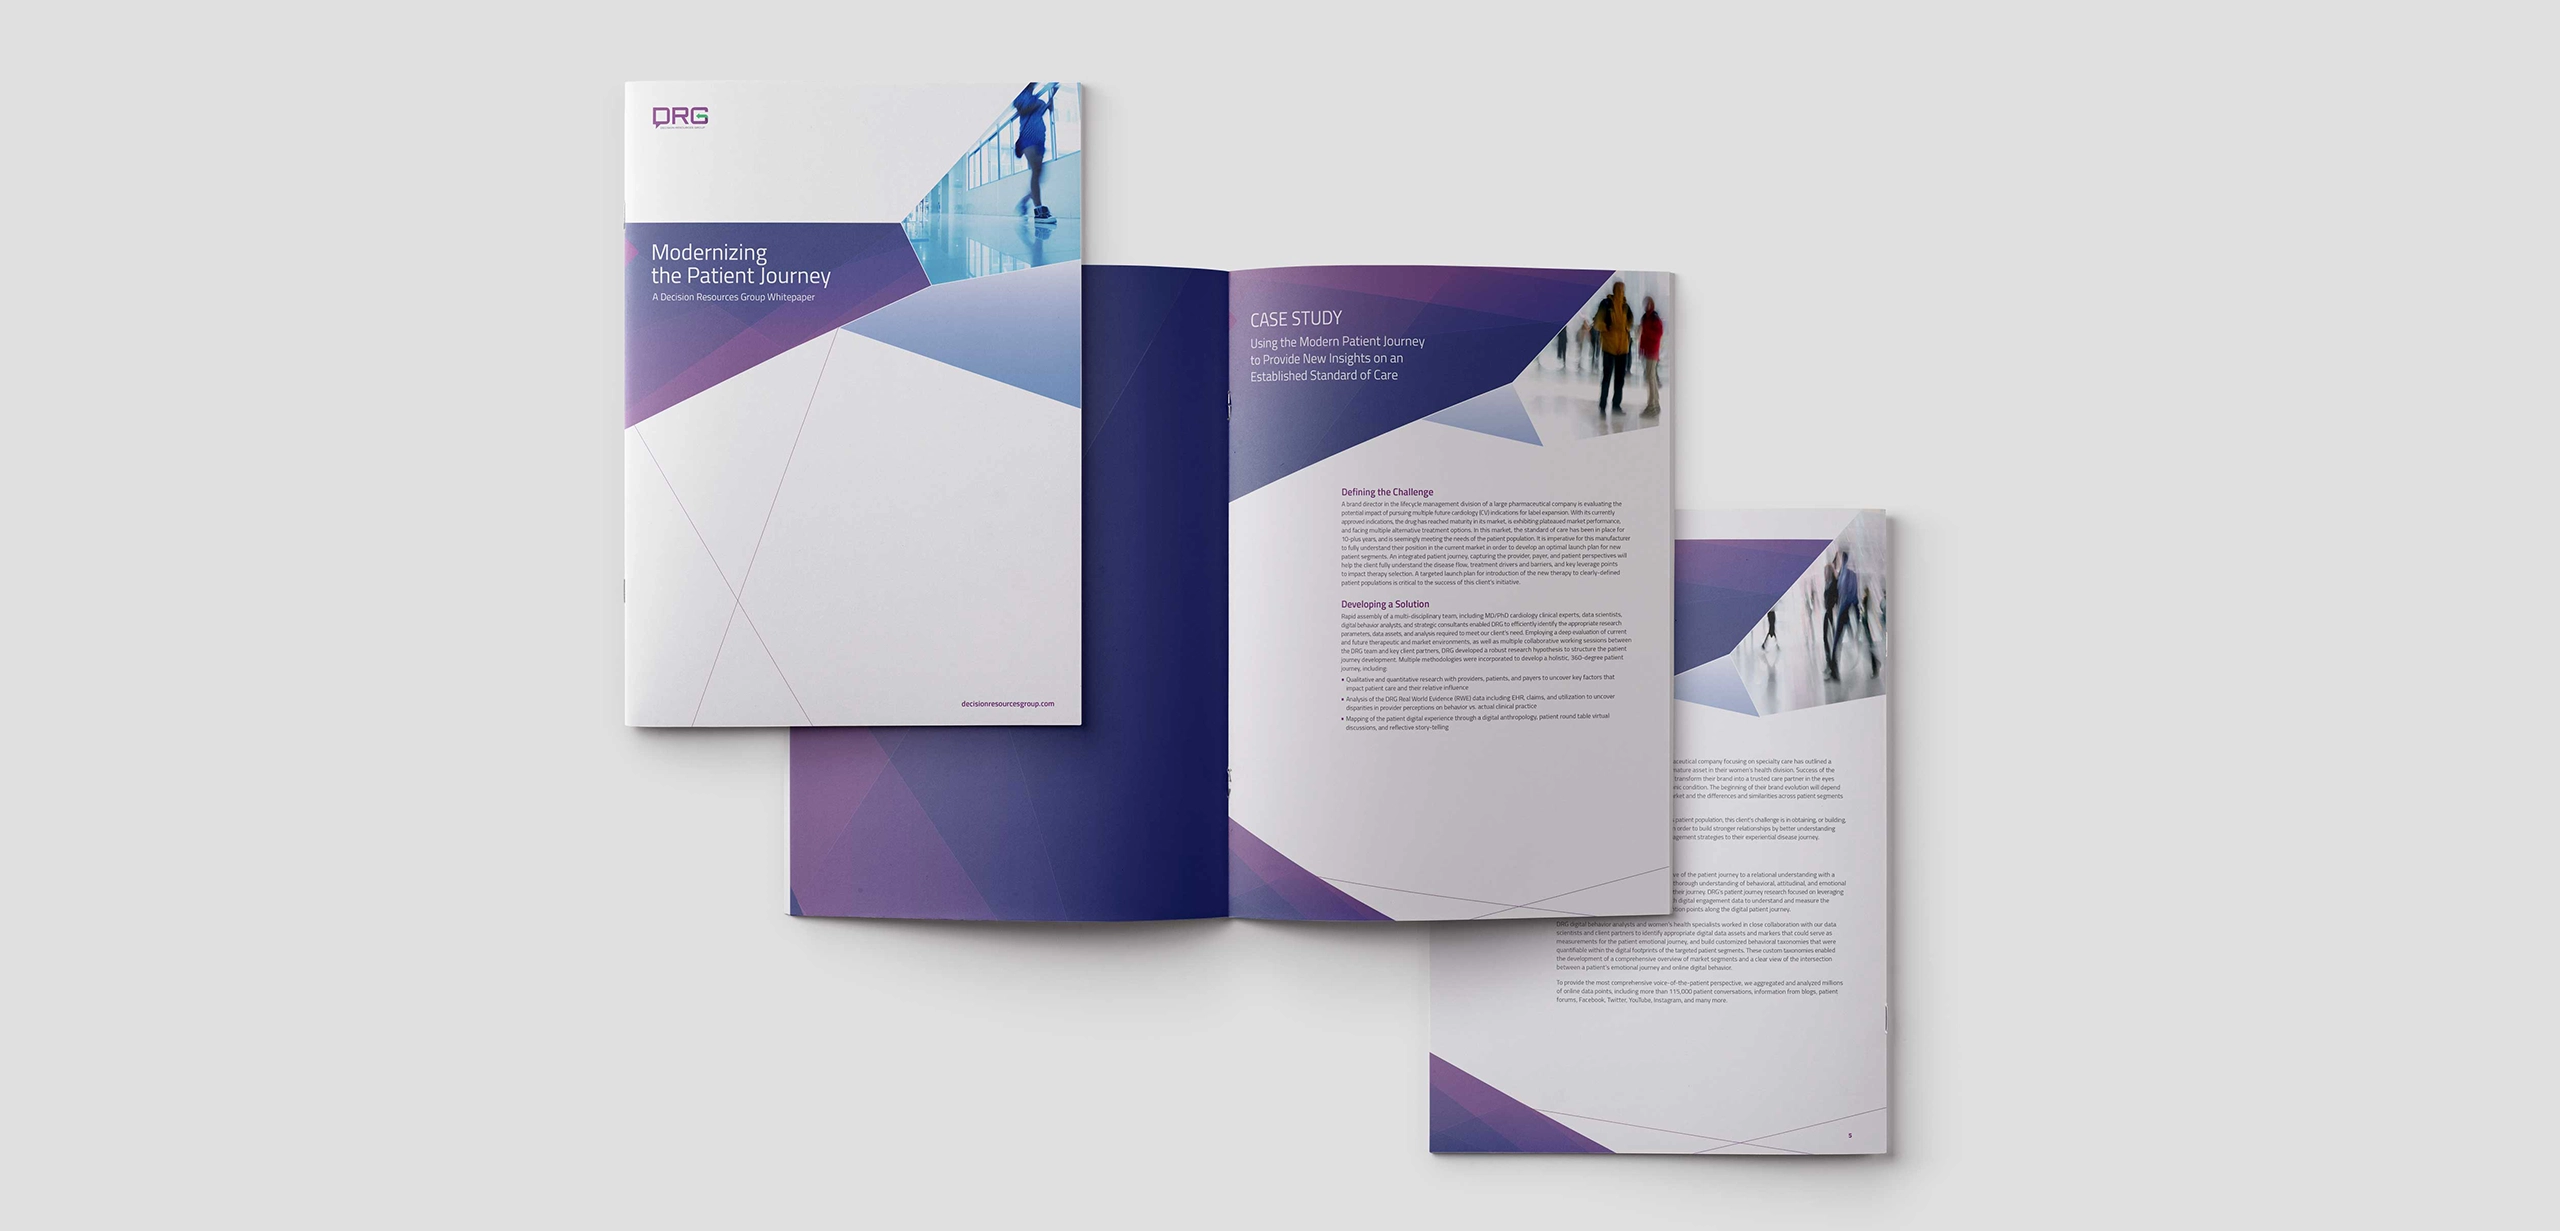 White paper branding and design for a global information and technology services company